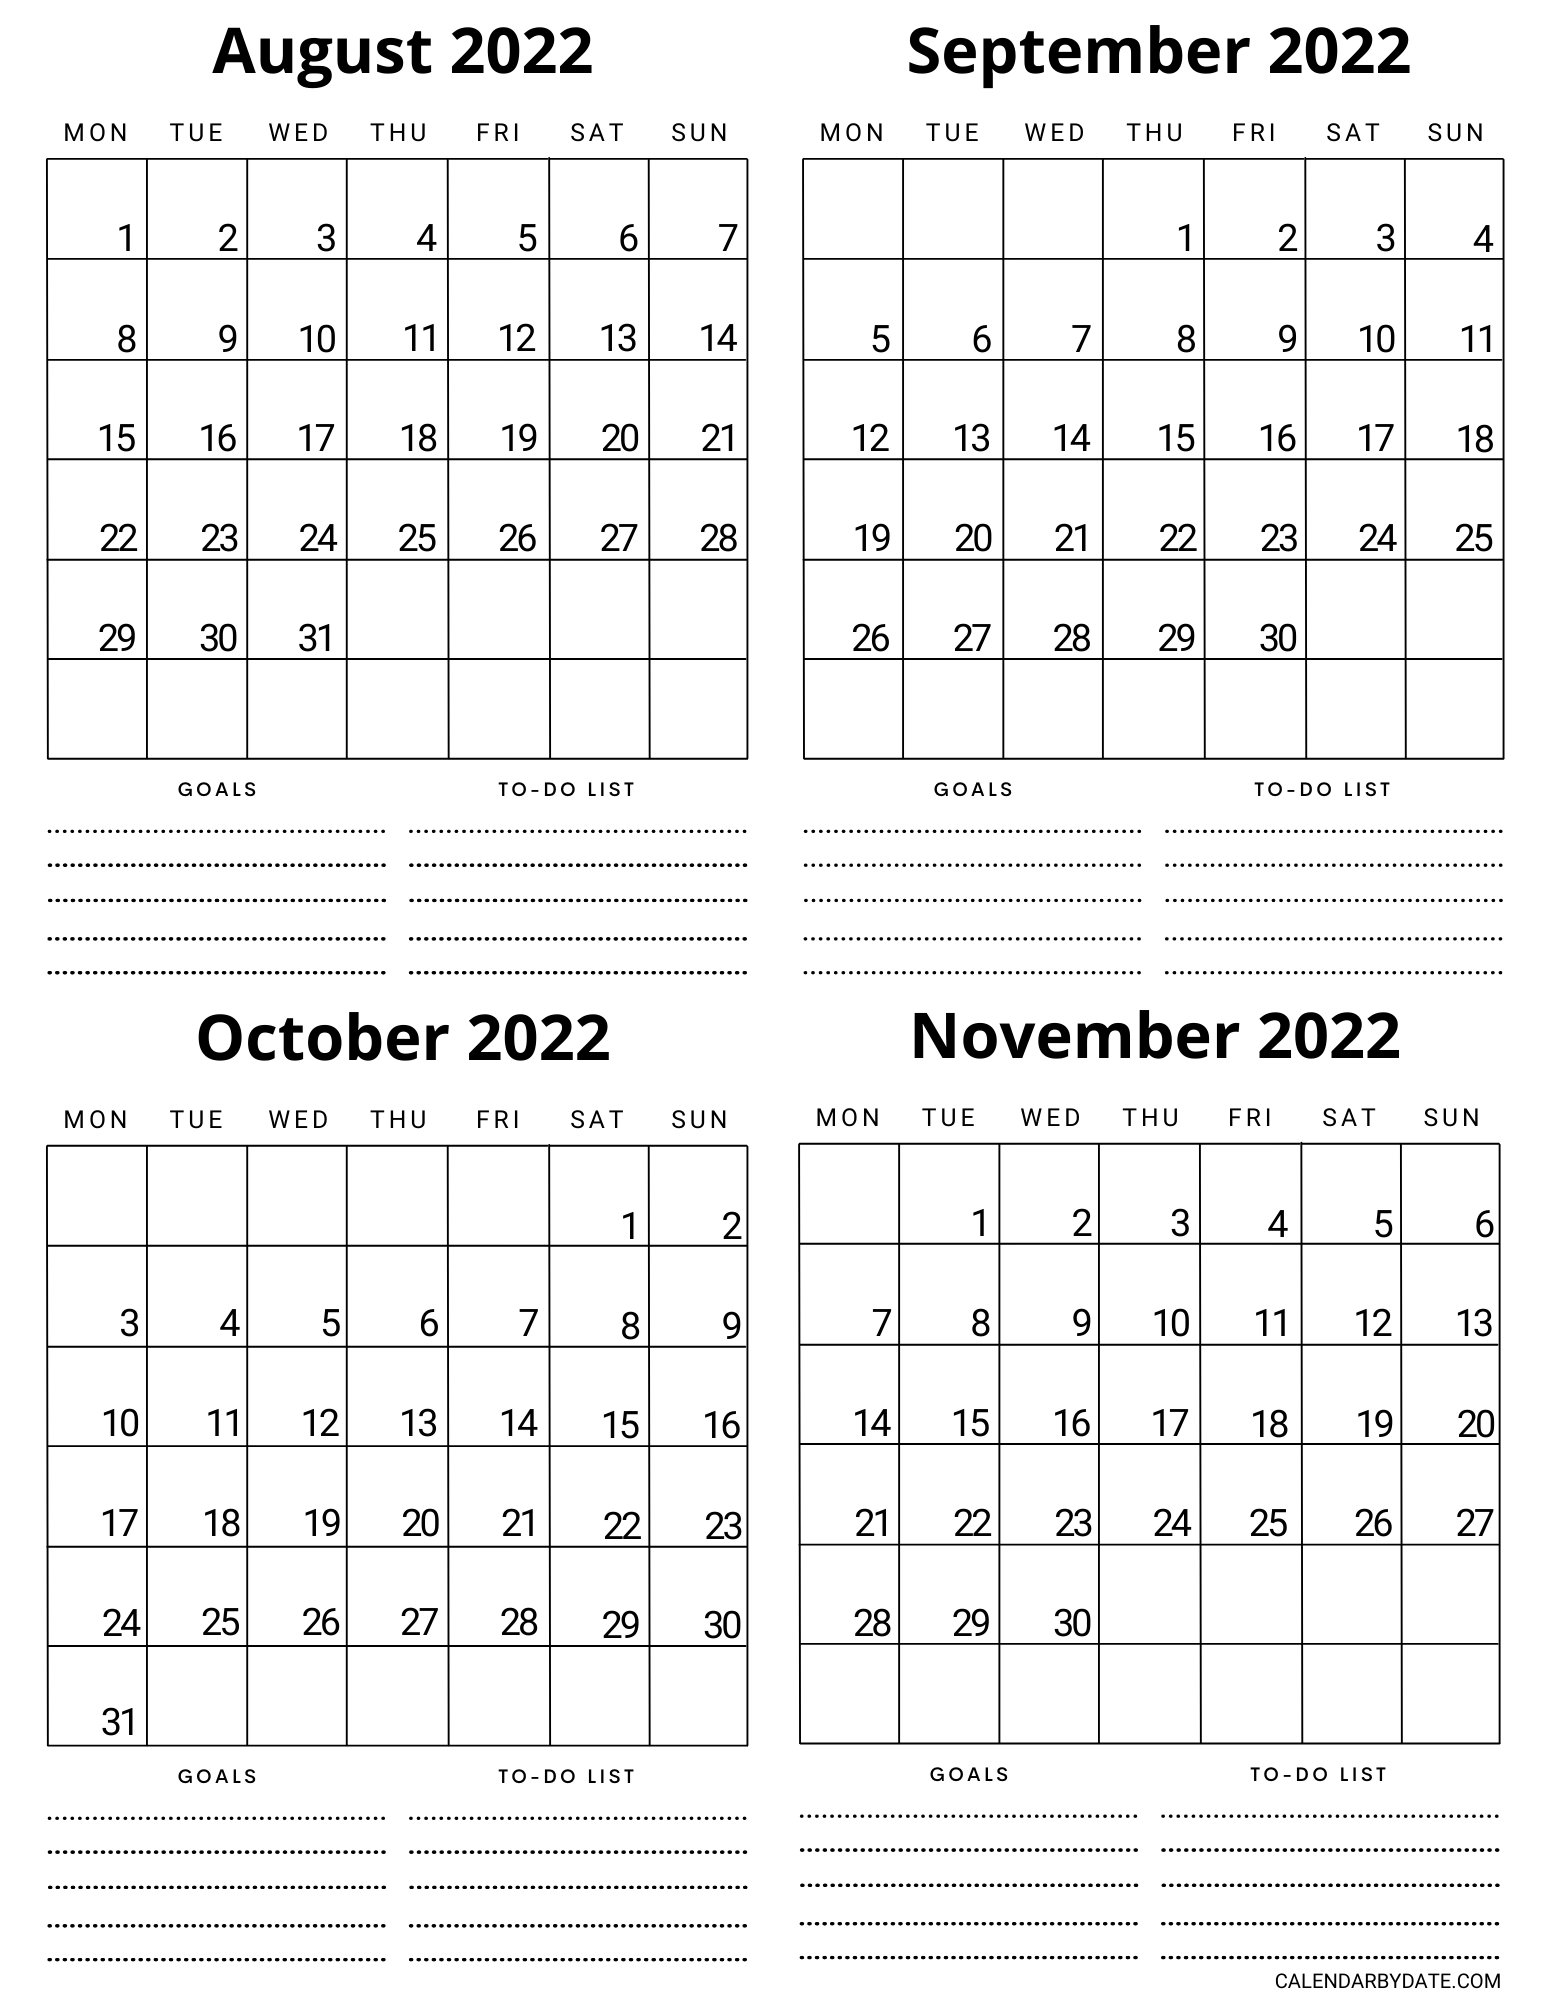 August, September, October, and November 2022 calendar template. The bold monthly dates are displayed in a one-page calendar grid, with the week starting from Monday.